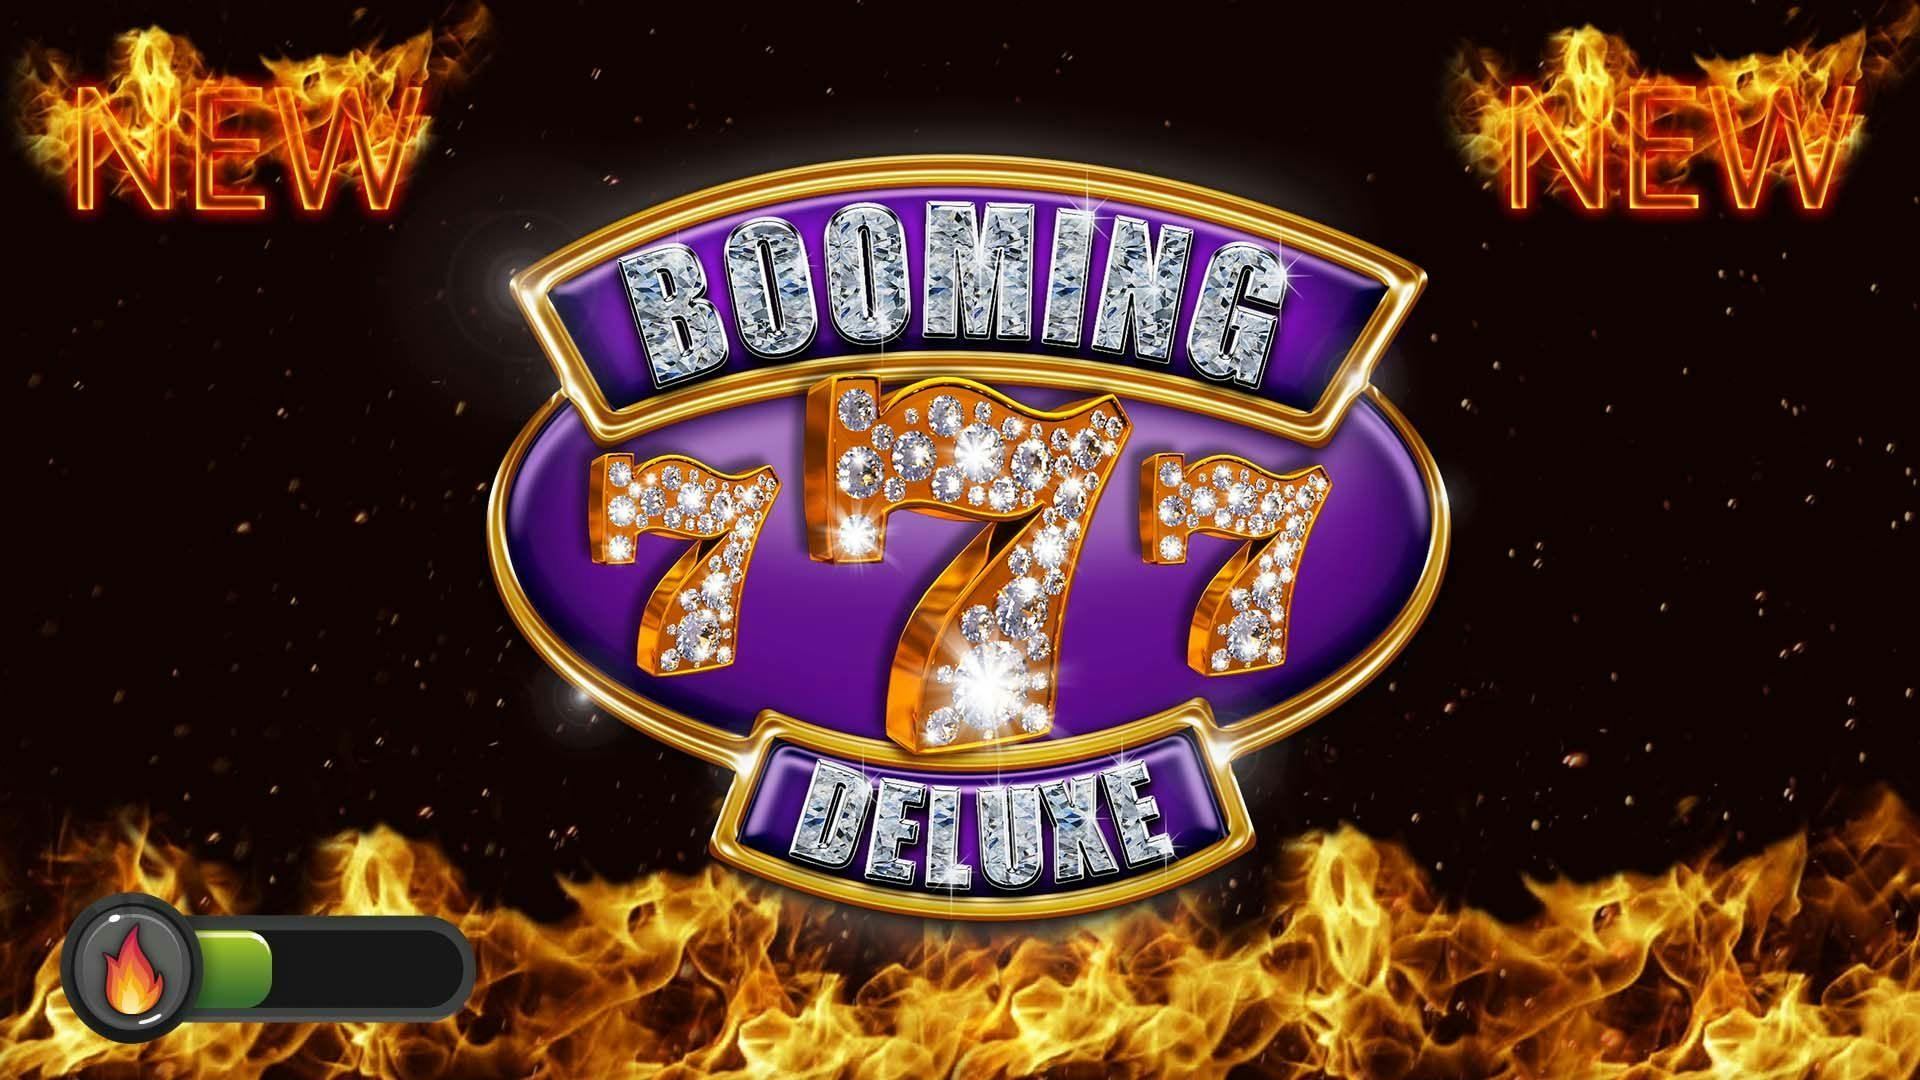 Booming Seven Deluxe Slot Machine Online Free Game Play